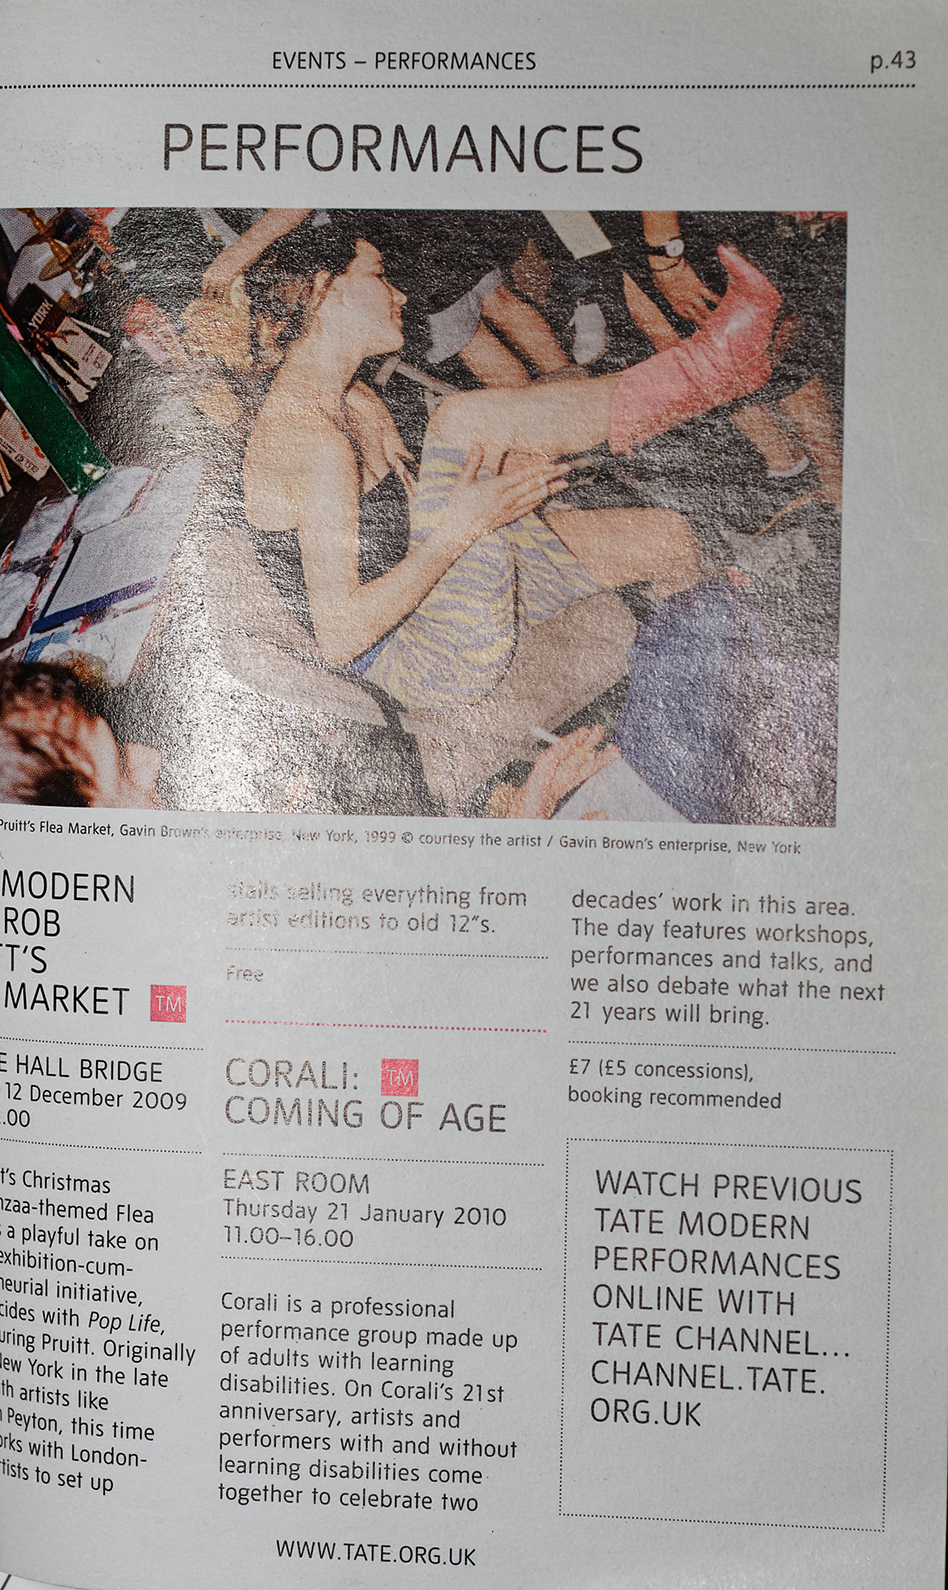 Corali Dance Company featured in the Tate brochure for their event Coming of Age 2010